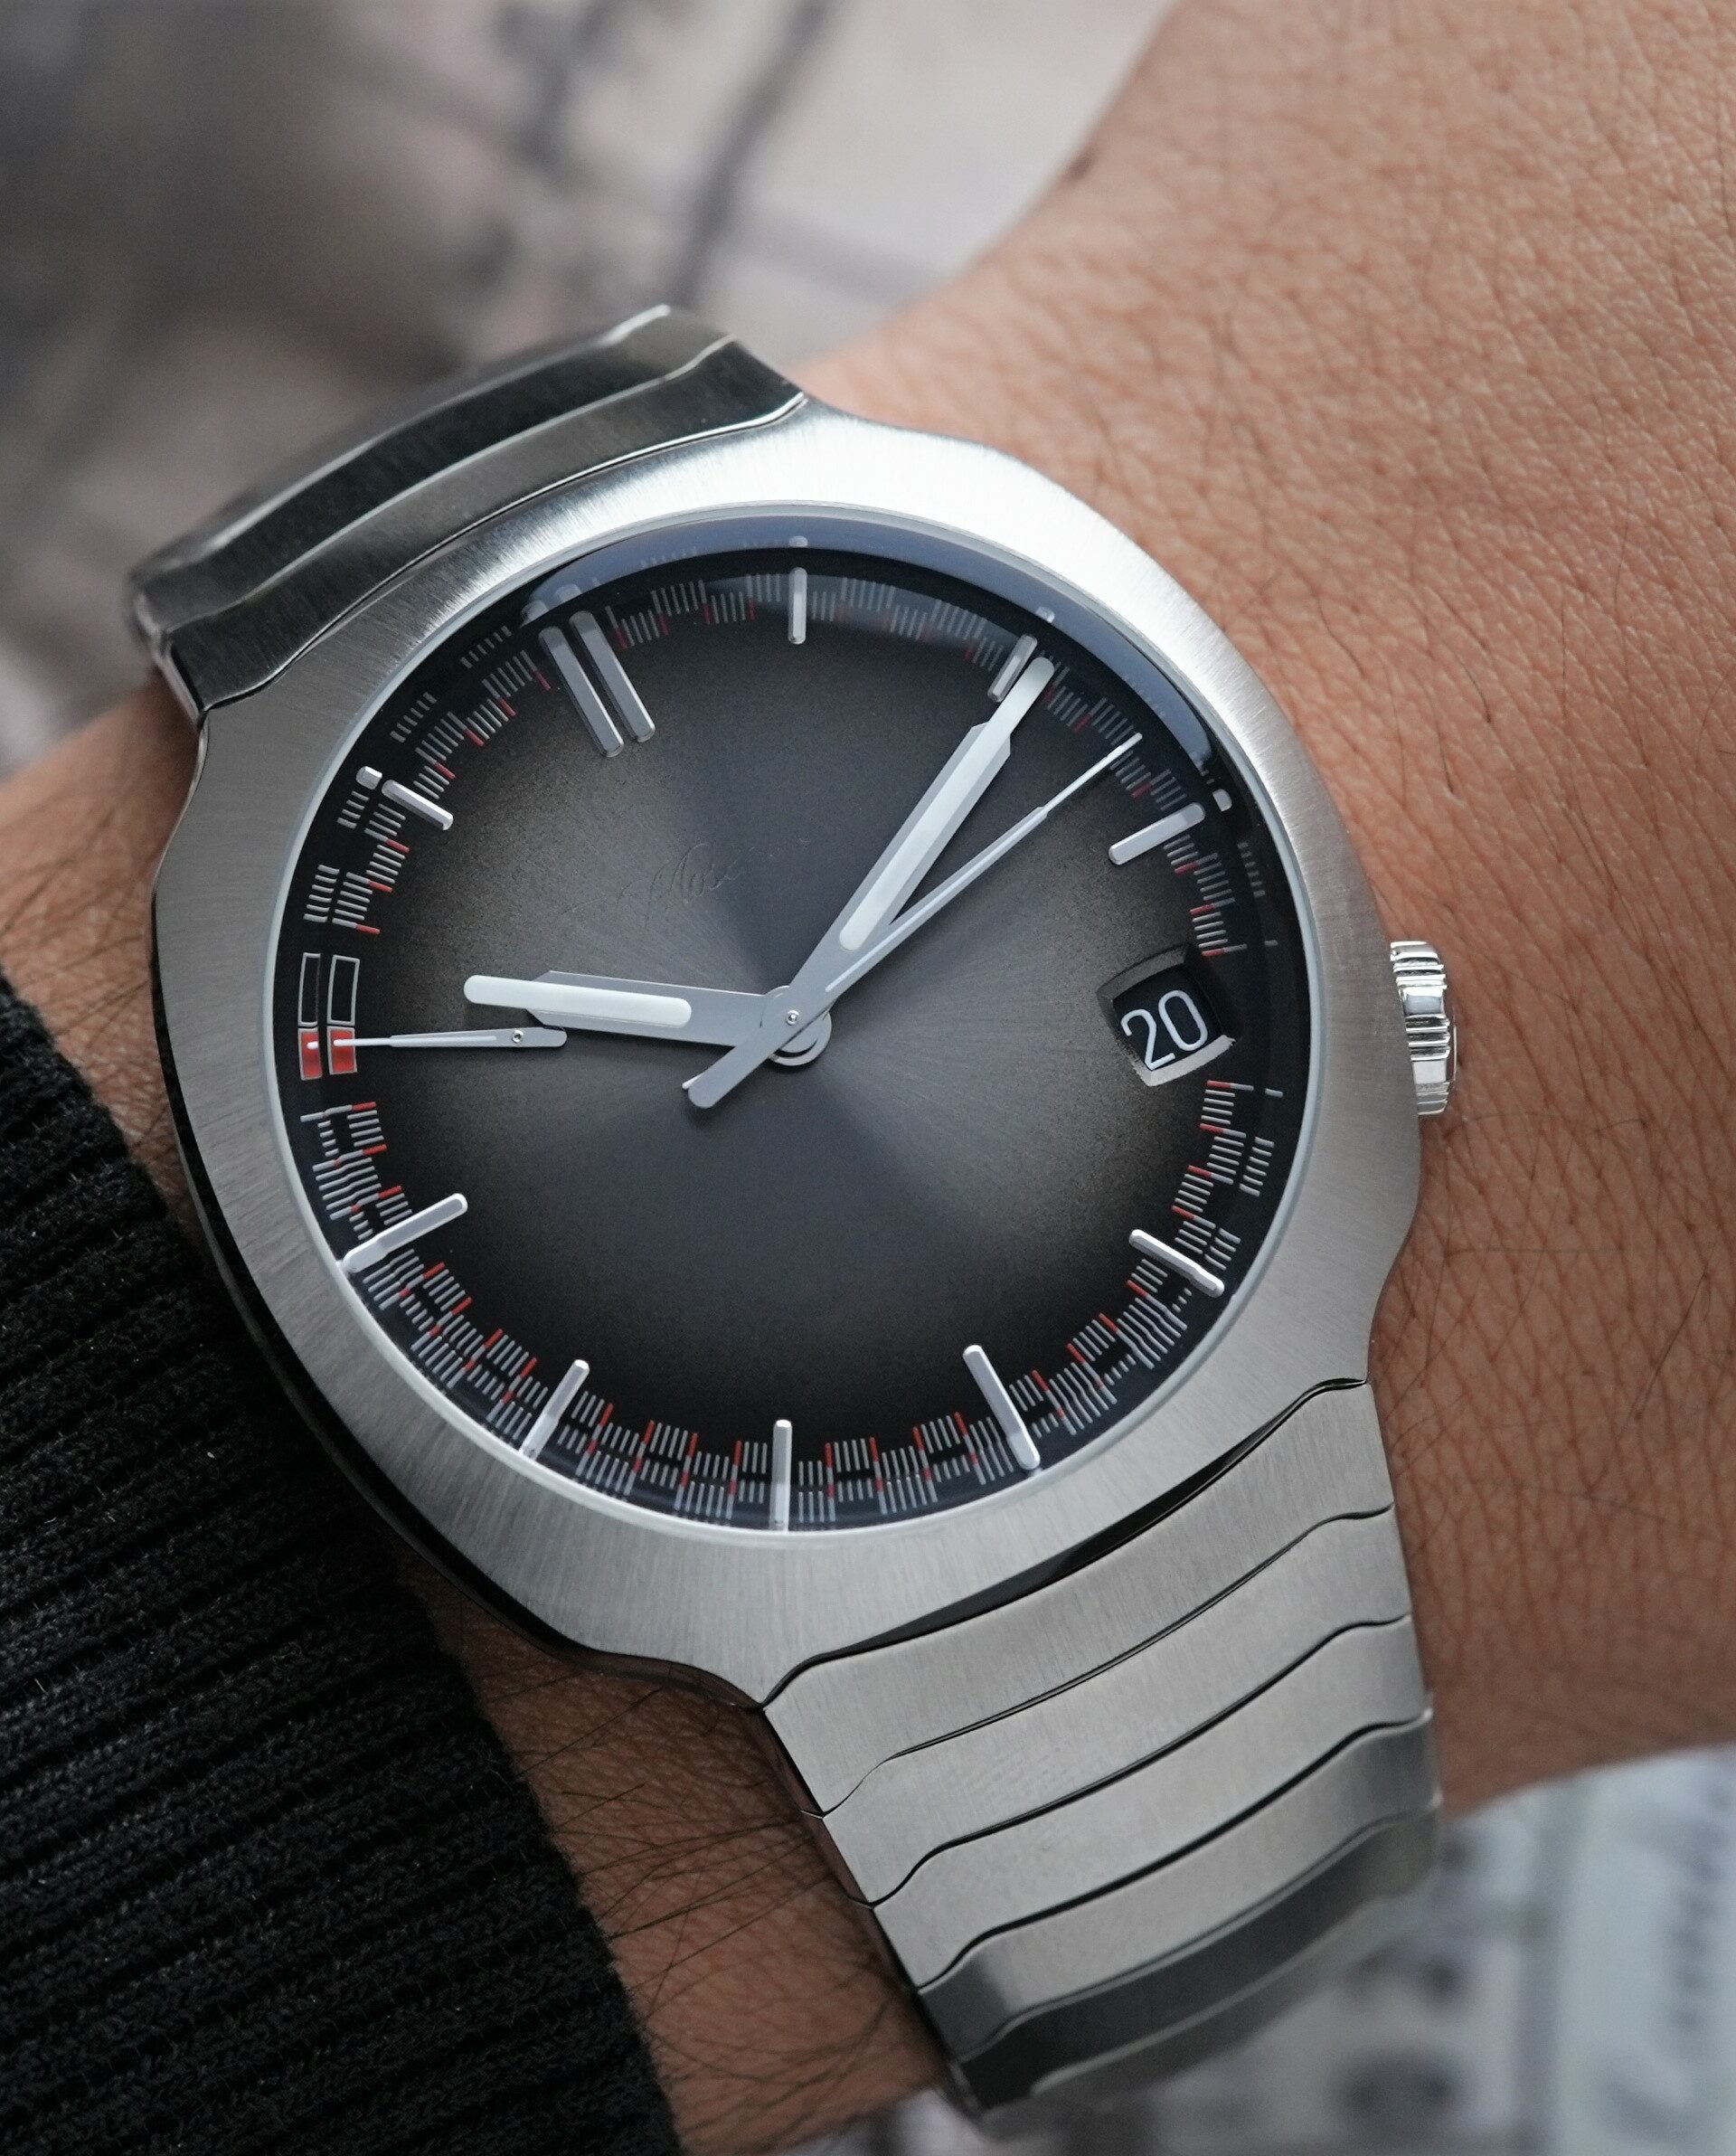 H.Moser & Cie. Streamliner Perpetual Calendar 6812-1200 watch featured on the wrist.